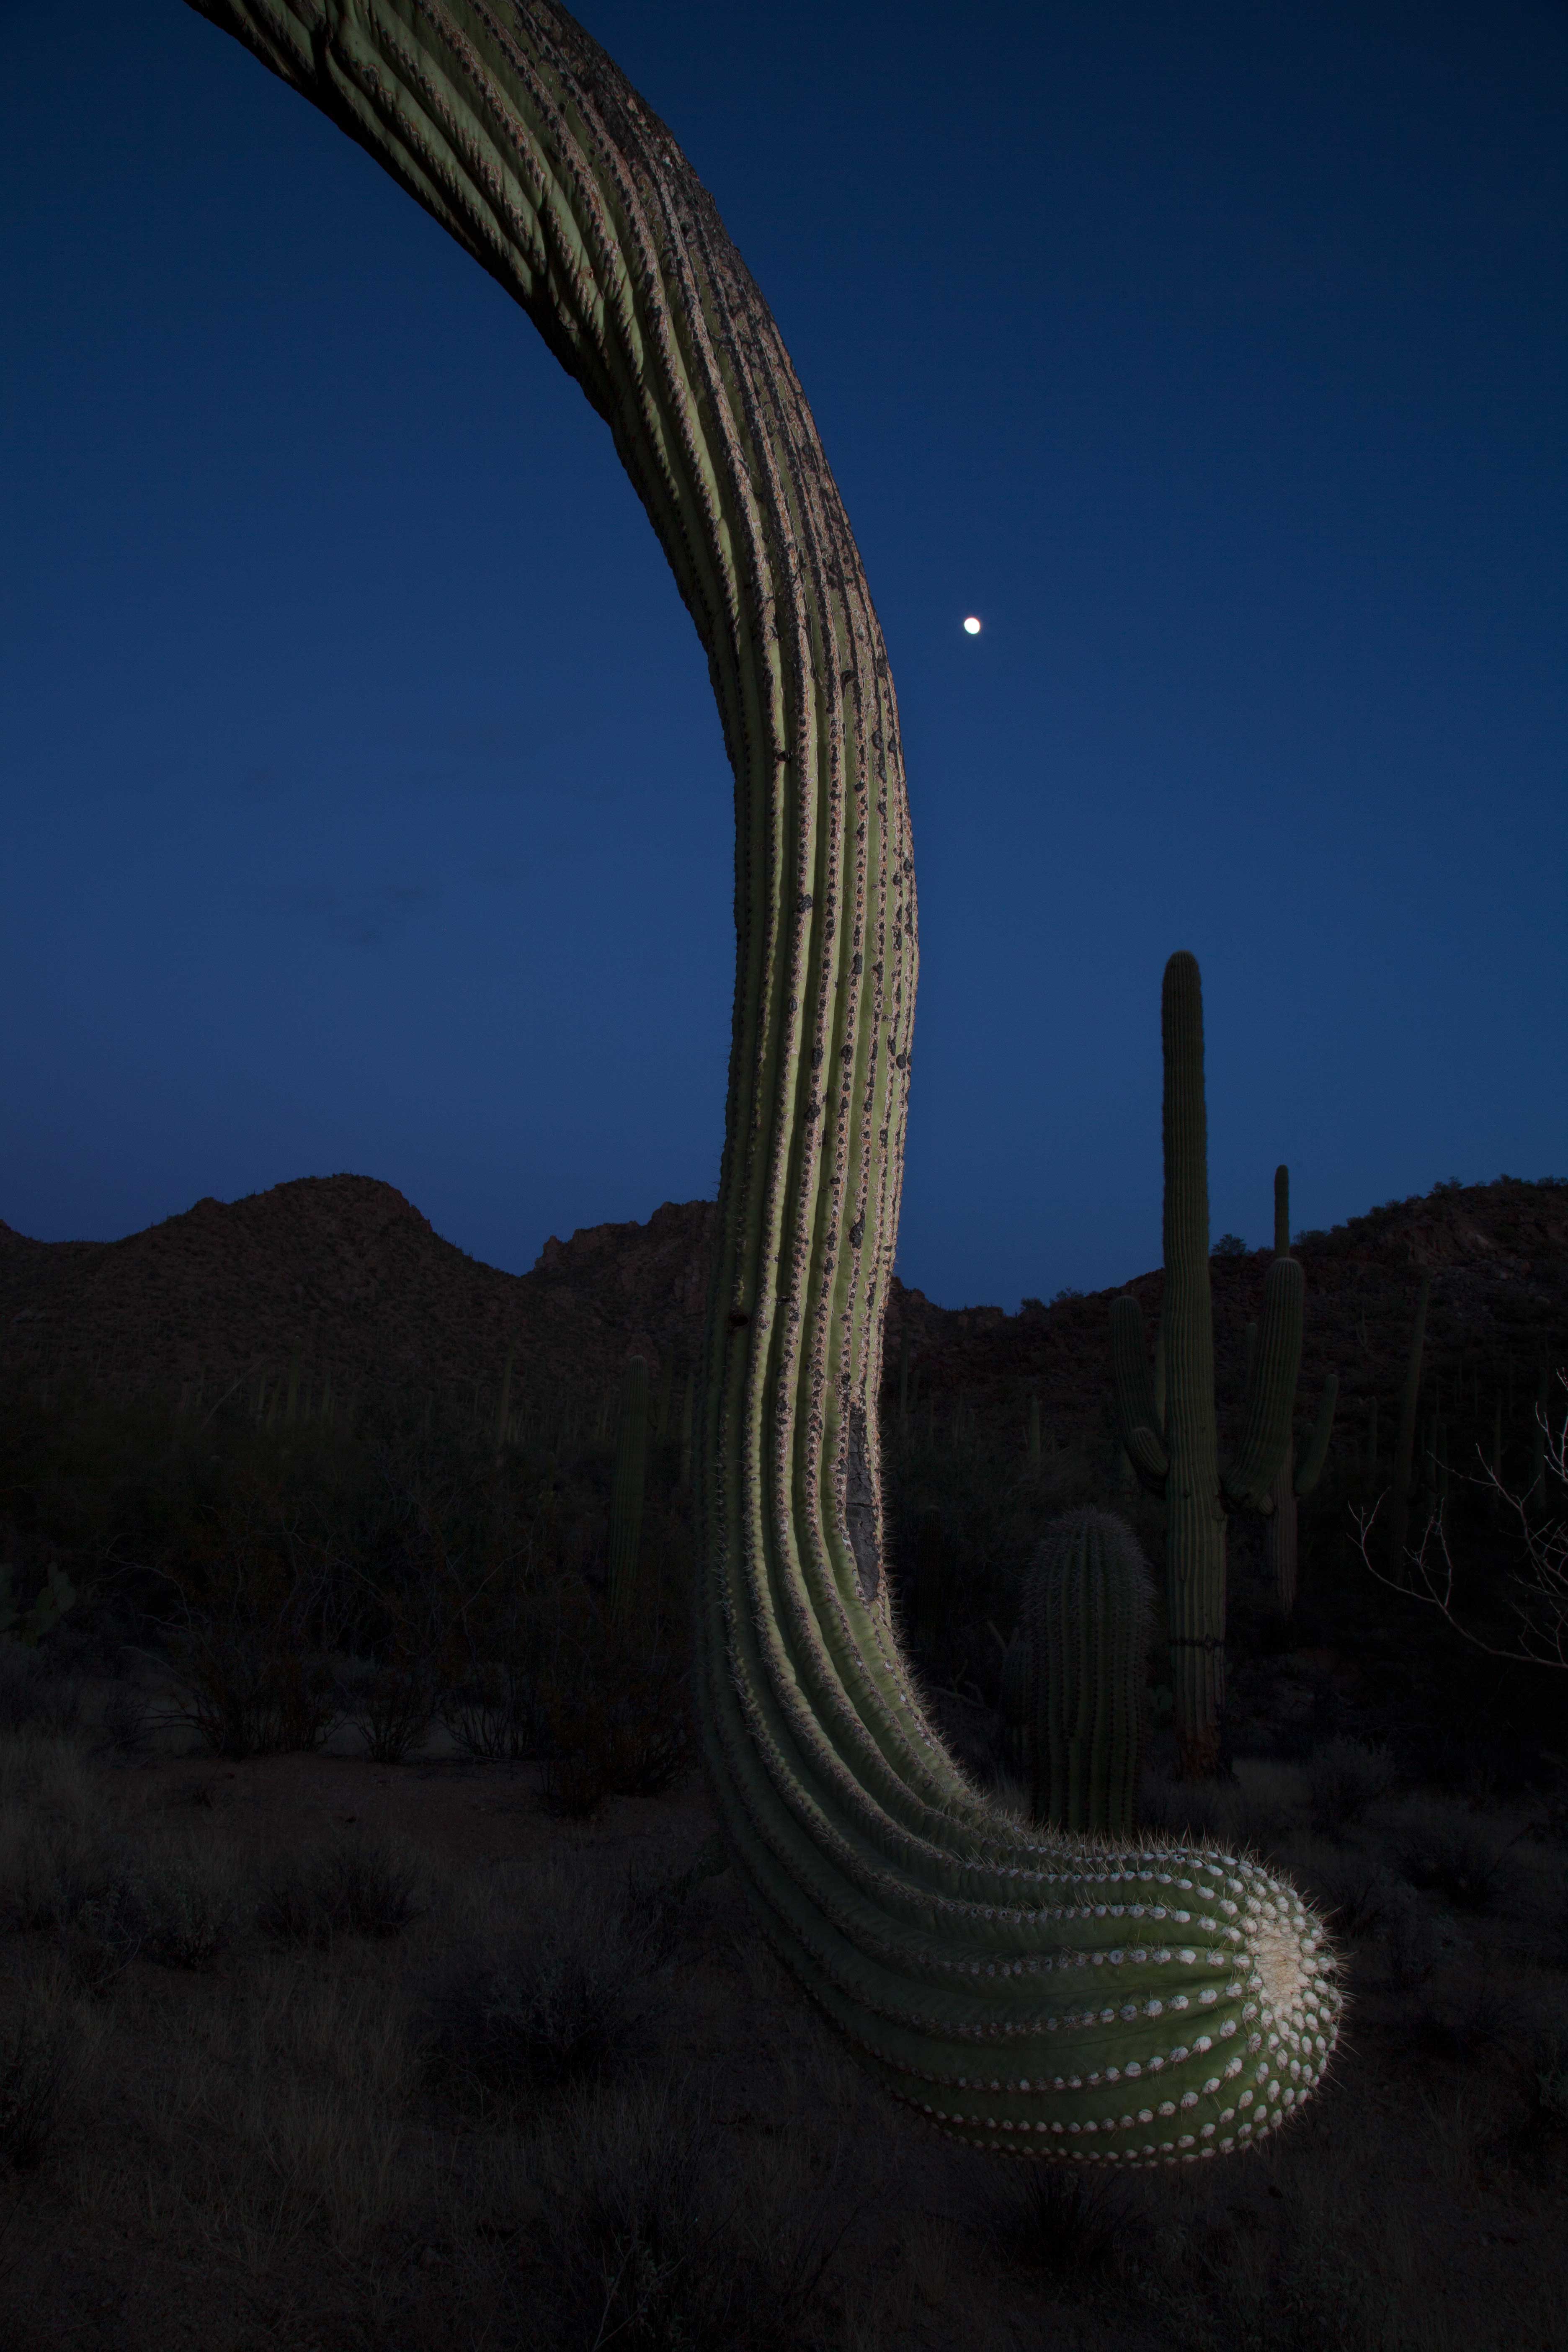 Saguaro National Park in the Tucson Mts. of southern Arizona